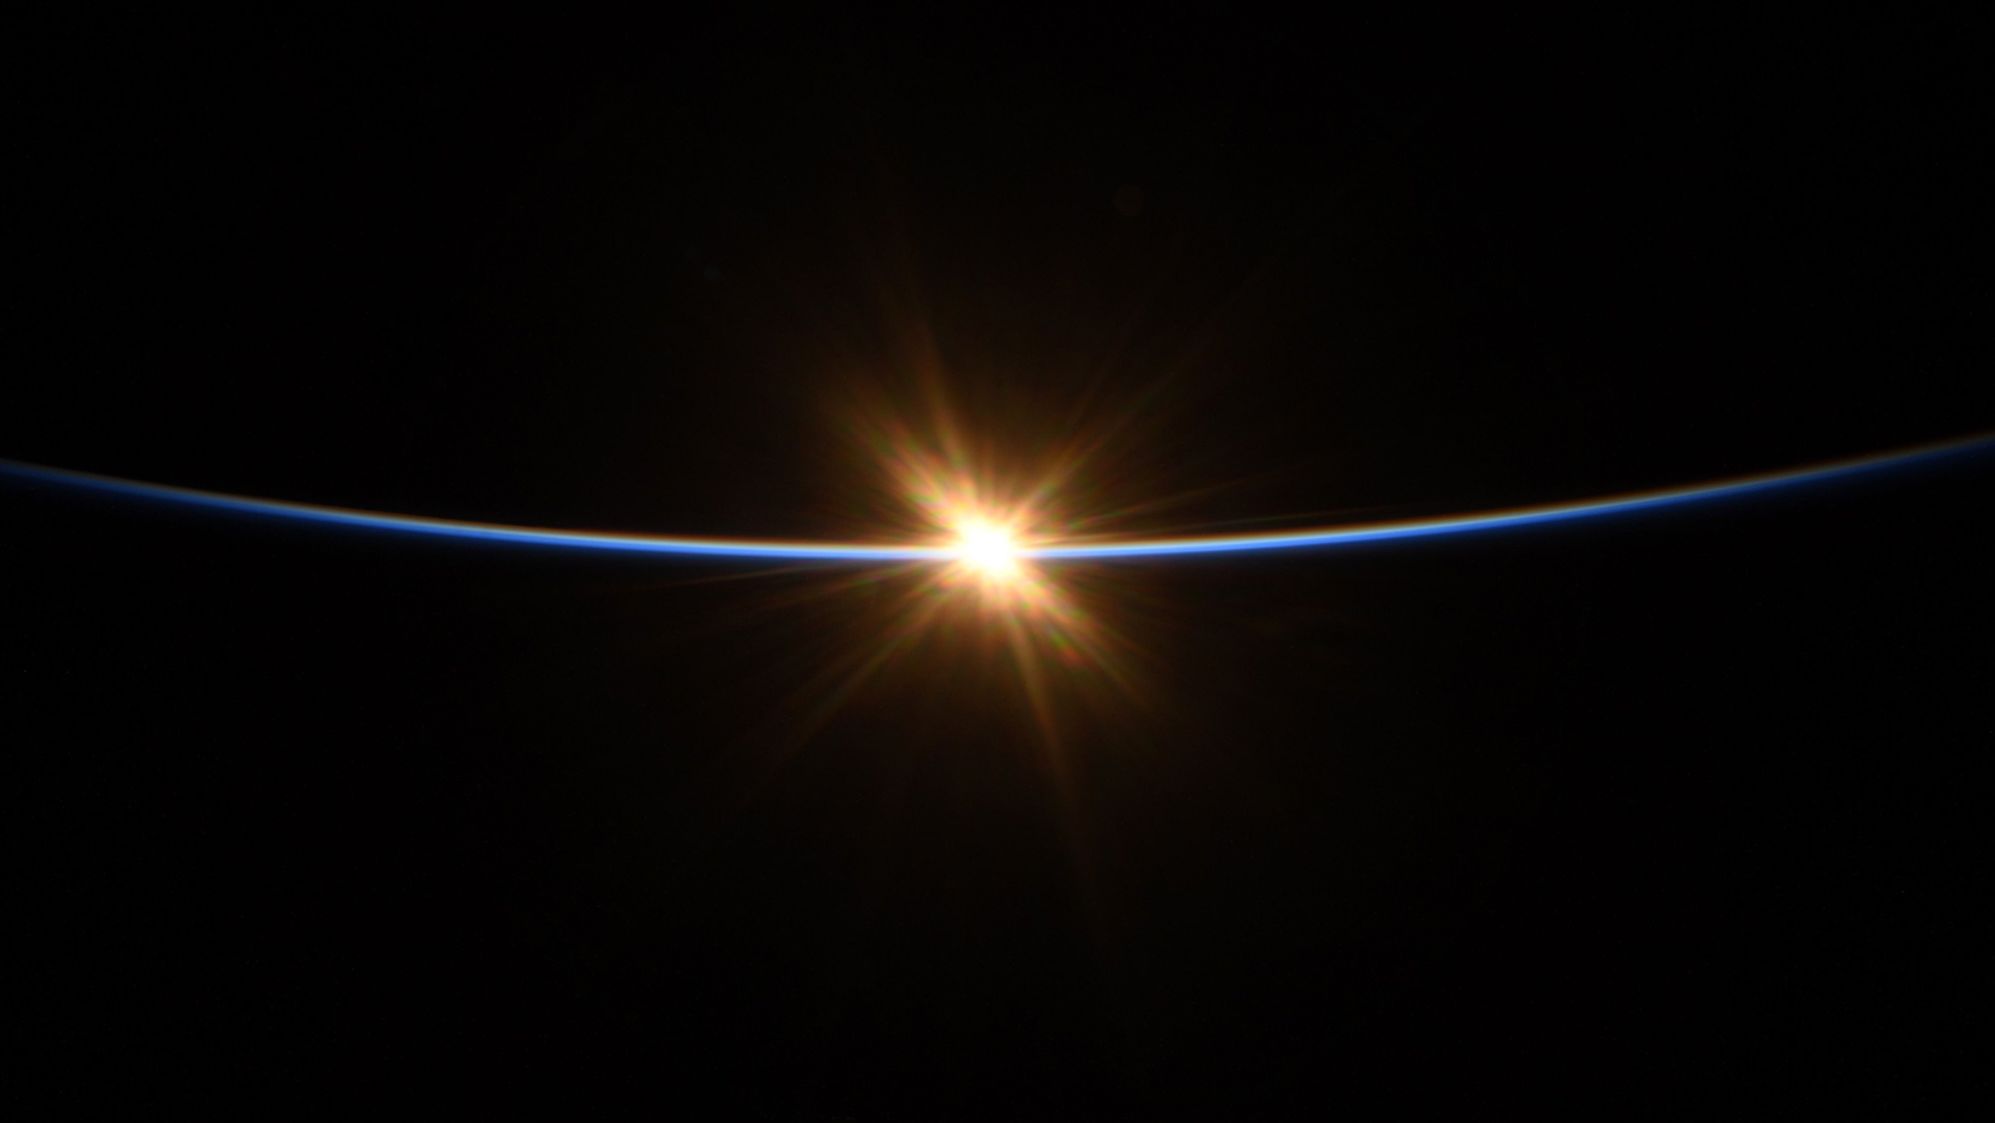 "First moments of sunrise from @Space_Station" as seen by Behnken on July 27.